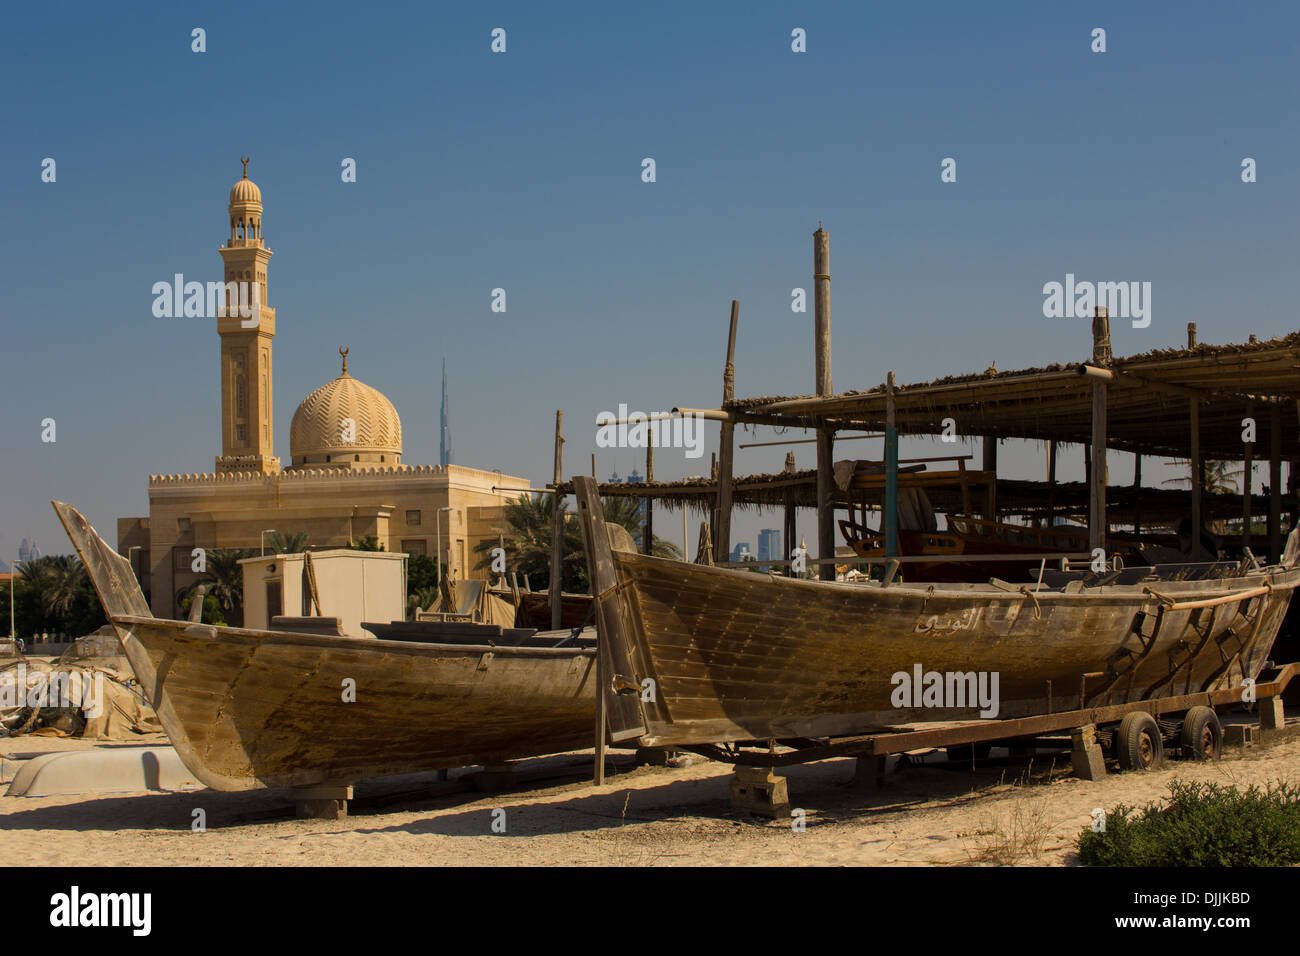 2 Racing Dhows and Mosque with Burj Khalifa in the distance, Jumeirah, Dubai, UAE Stock Photo